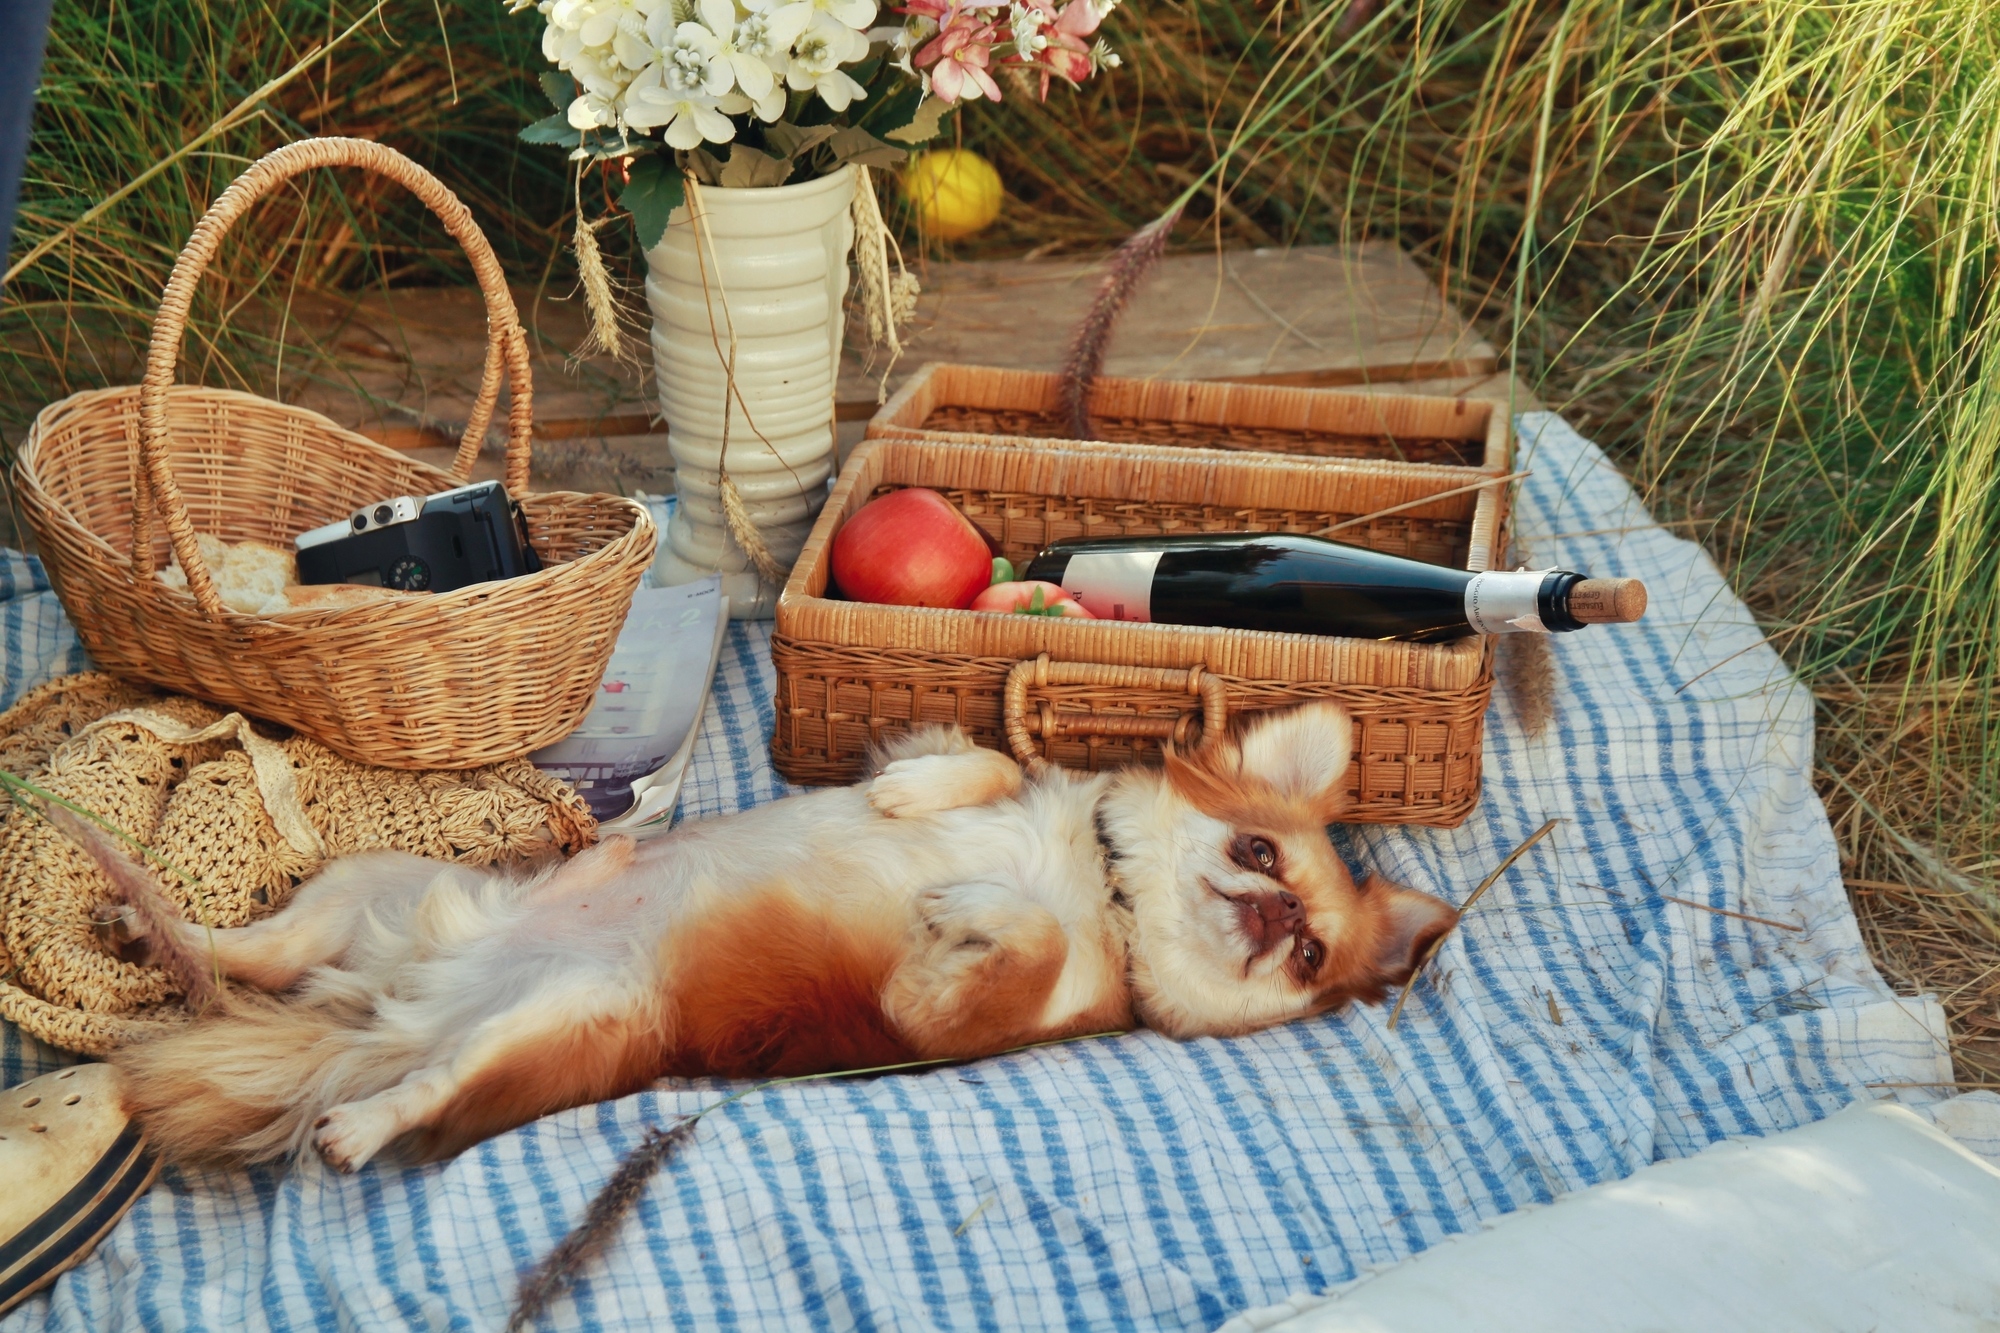 Cute little dog on its back on a picnic blanket with picnic basket, wine, and fruit